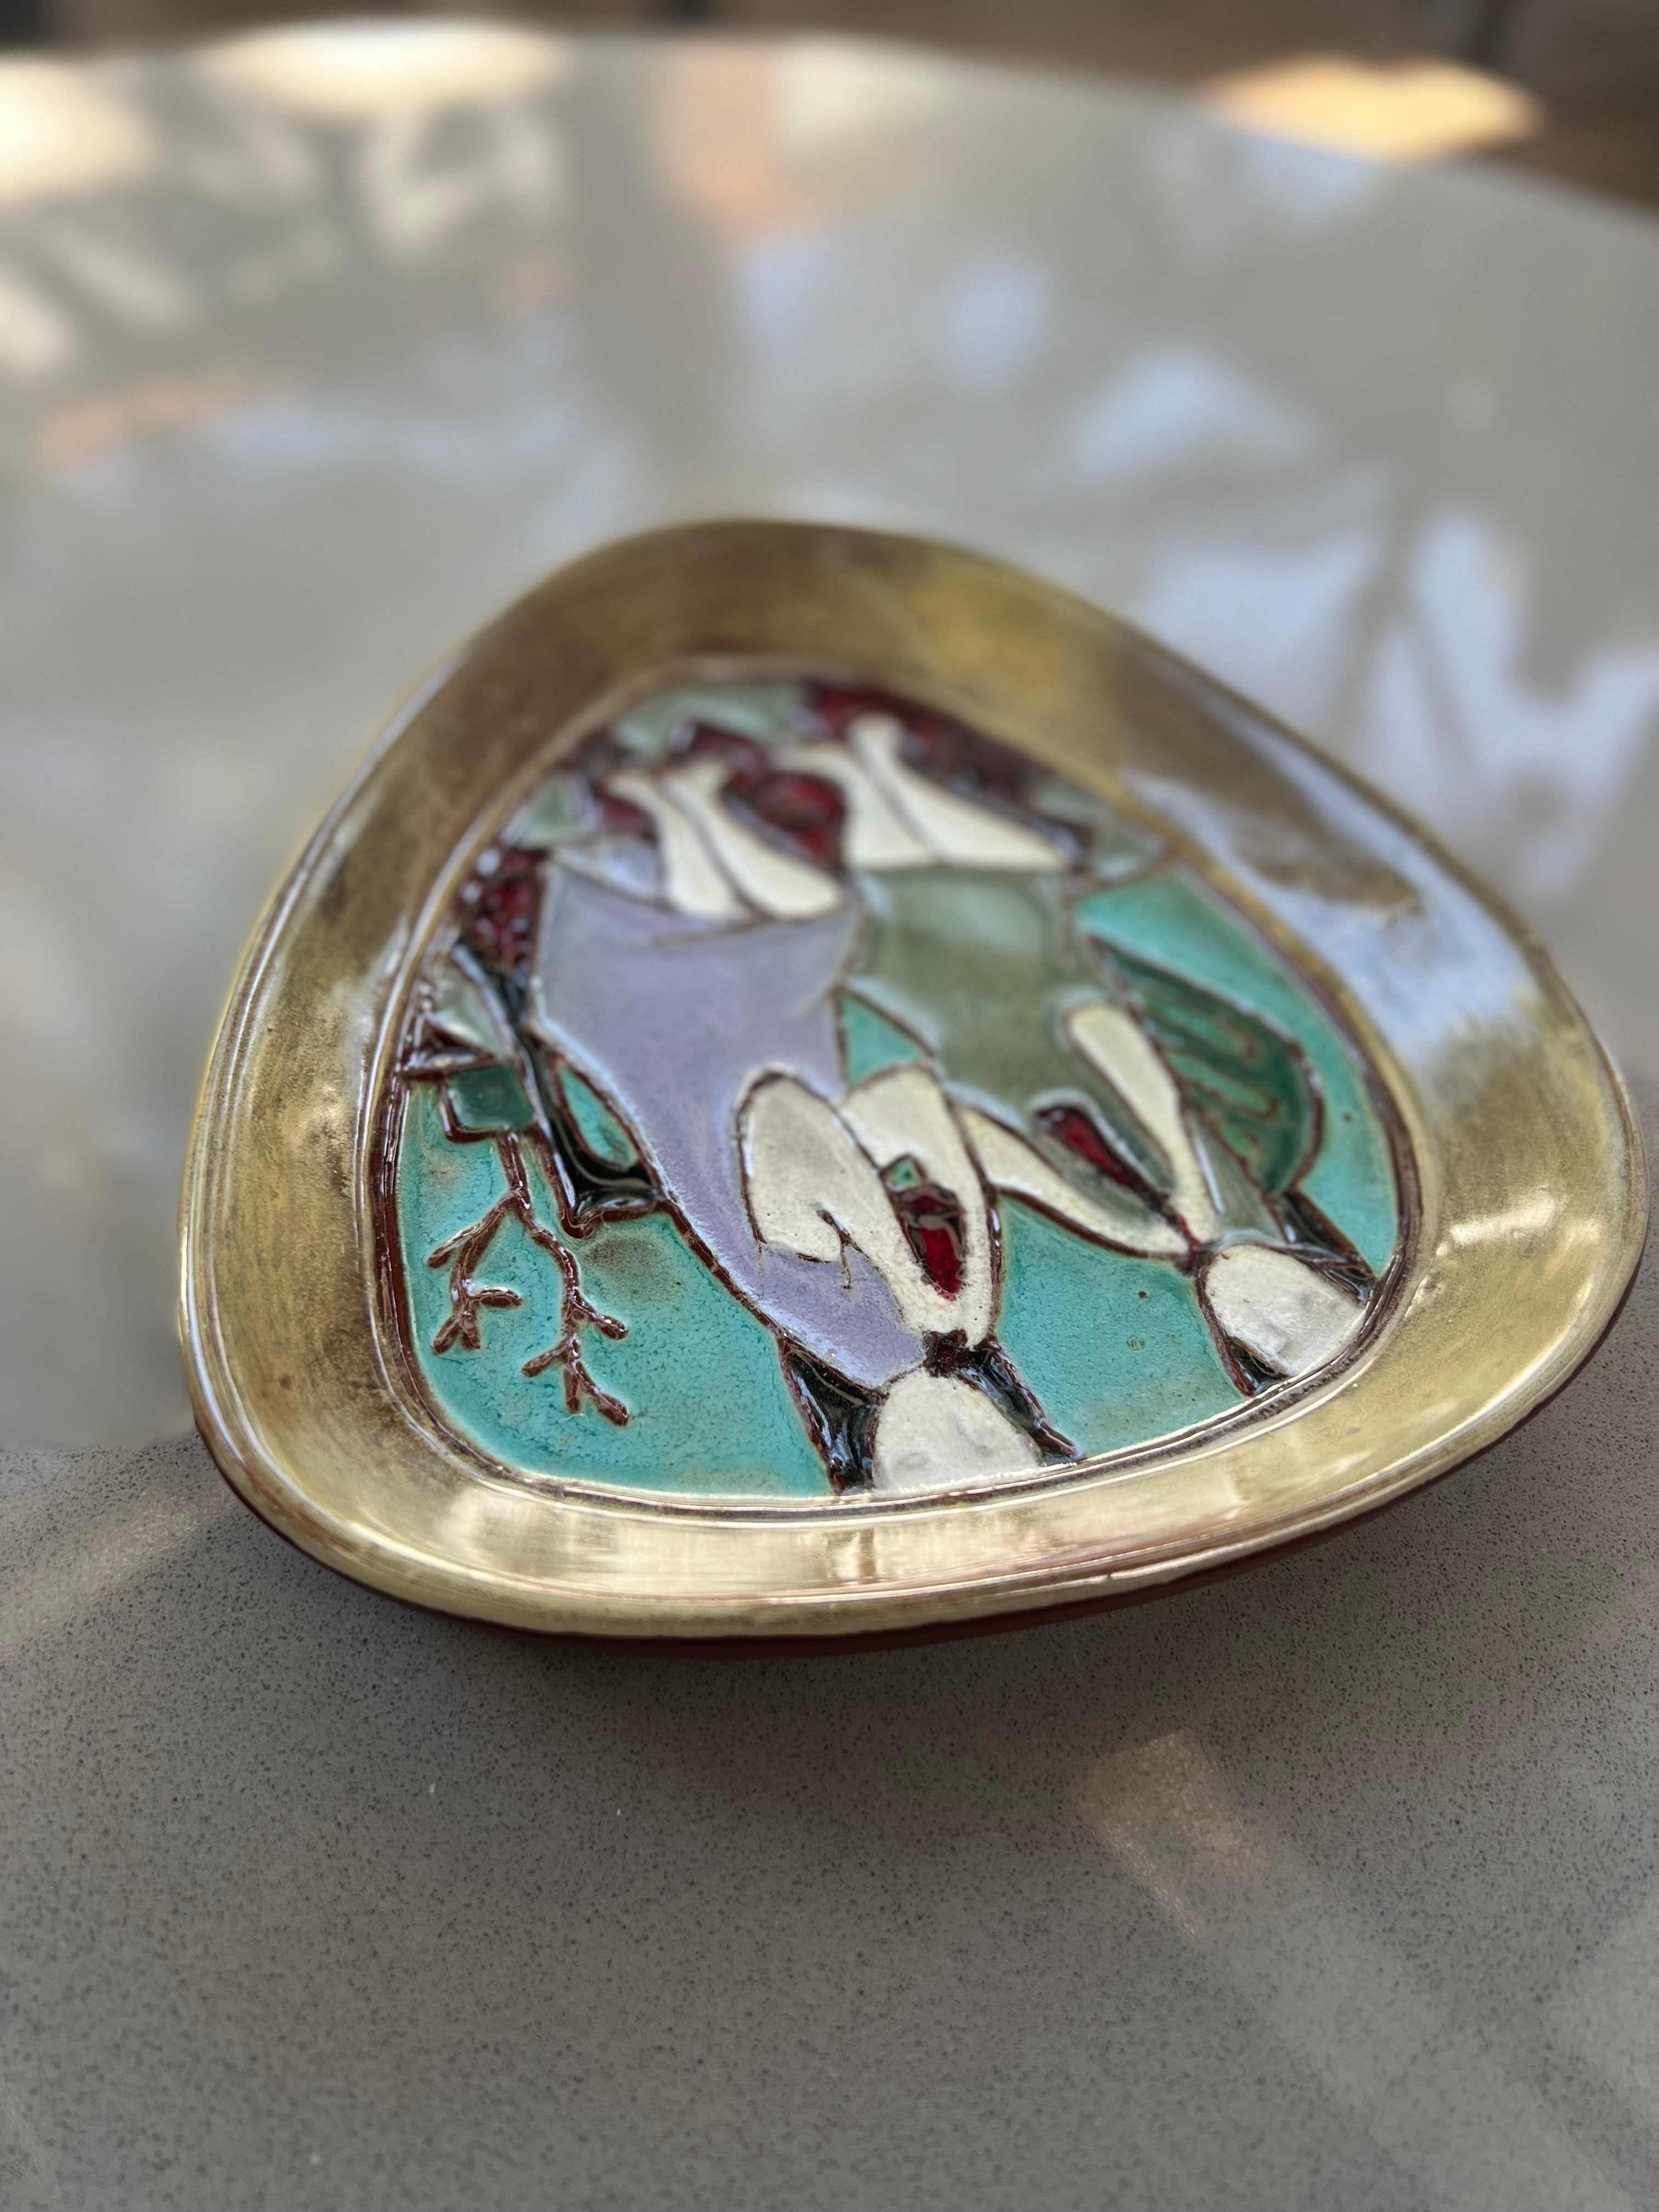 Beautiful ornament or accent piece in any space, unique colors and shapes with perfect glaze, owning a piece by Harris Strong is having a piece of American modernism